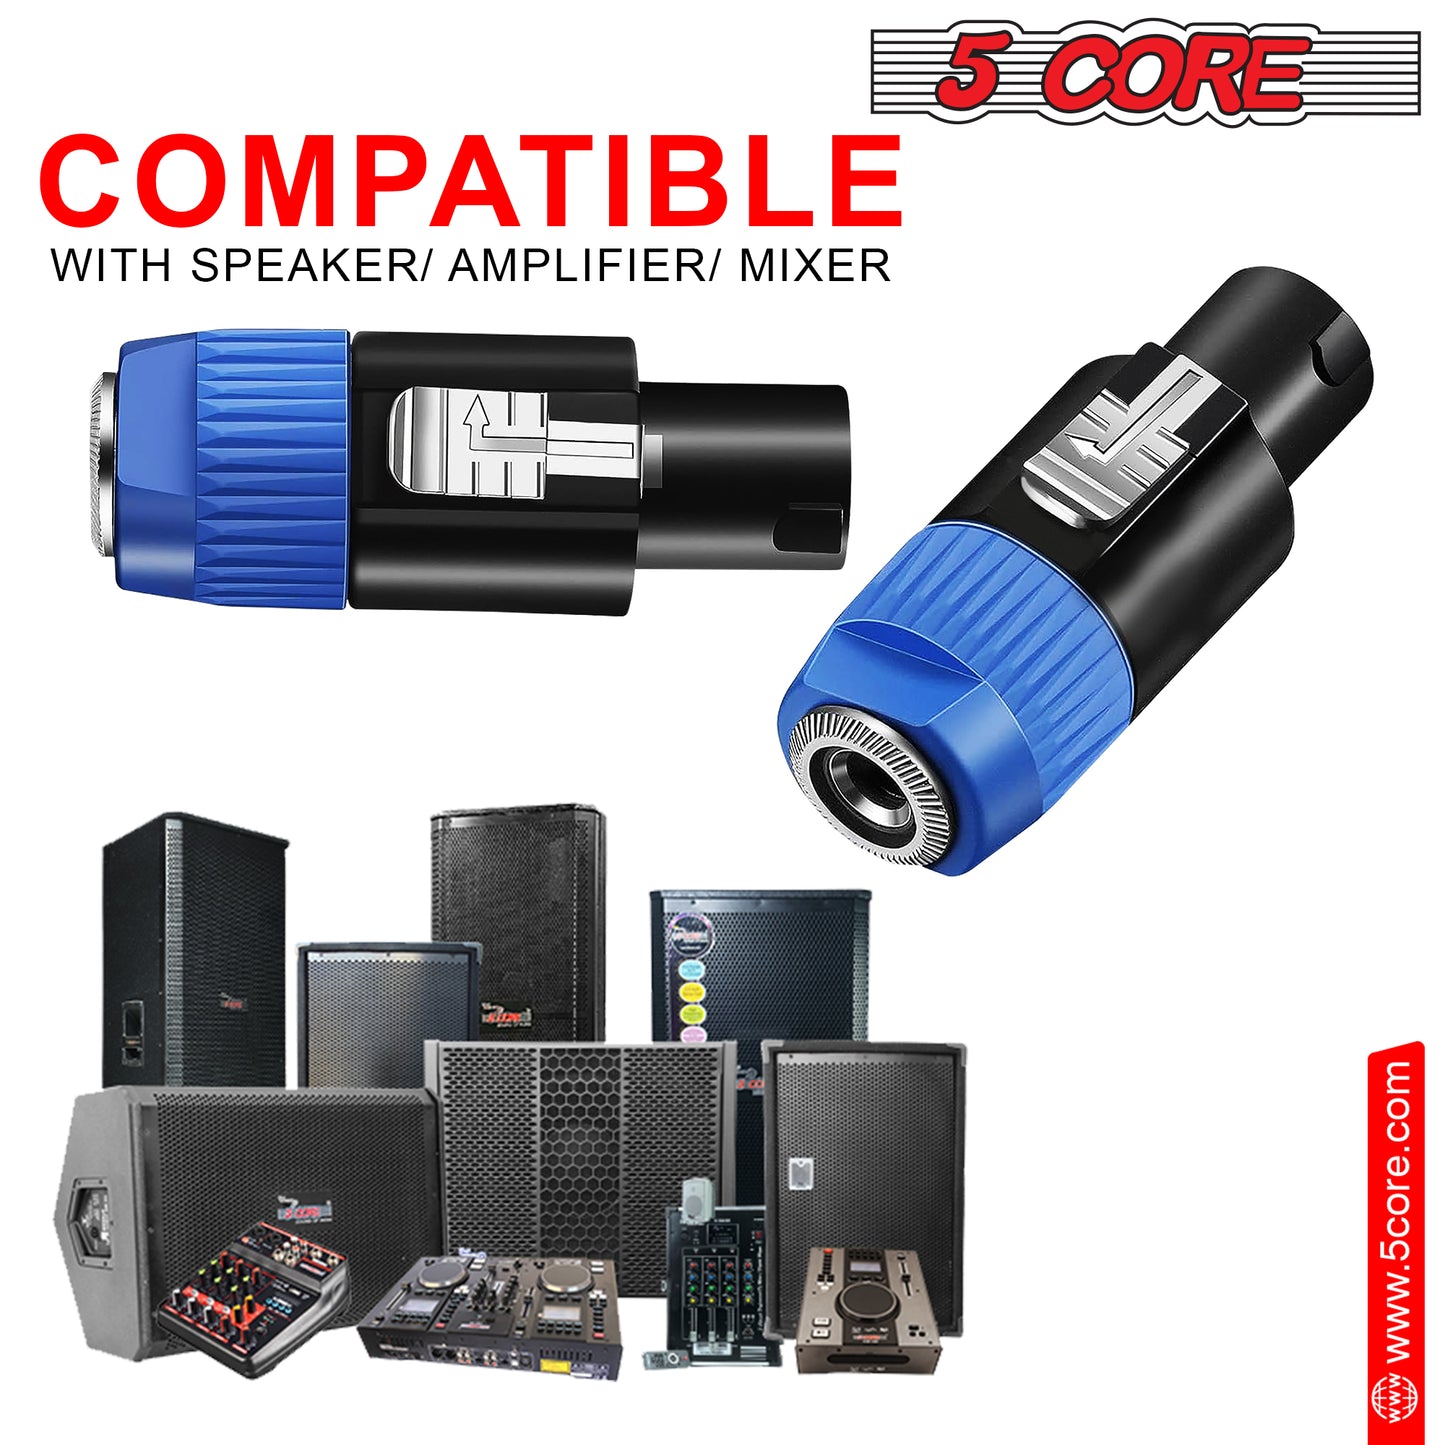 5 Core Speakon To 1/4 Adapter Connector, Upgraded 1/4 Female To Male Connector Speaker SPKN M-1/4 ADP F 1PC